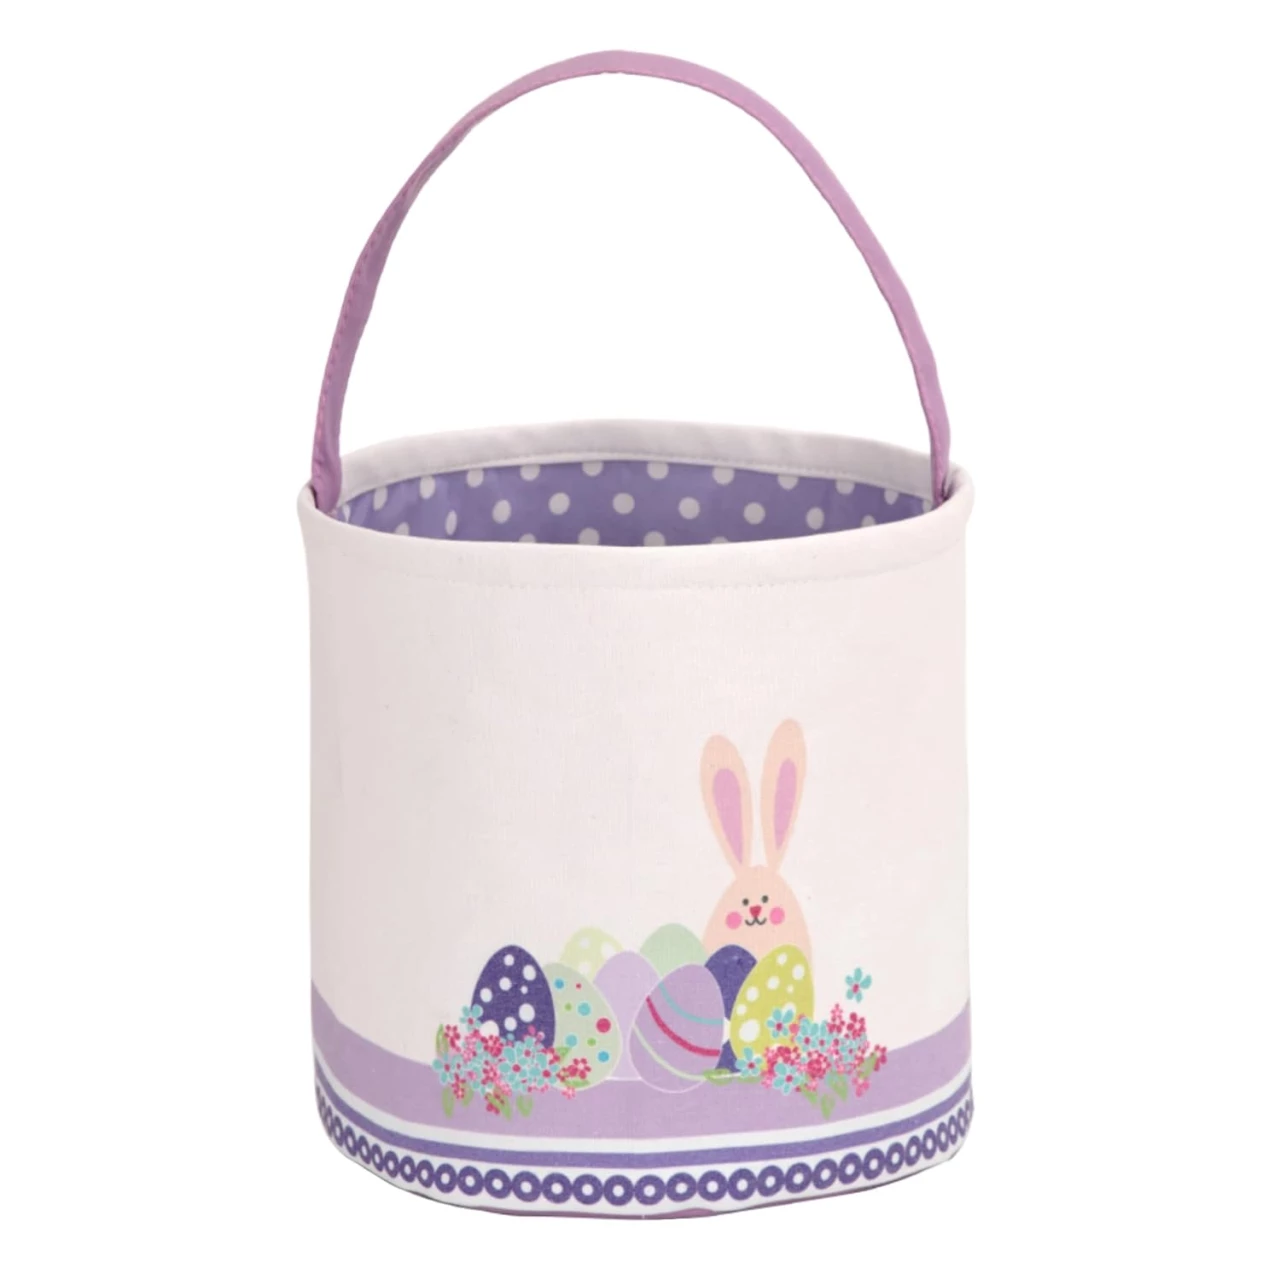 LessMo Easter Bunny Basket Egg Buckets, Purple Cute Personalized Canvas Cotton Tote Bags Egg Hunt Basket for Easter Party Gifts